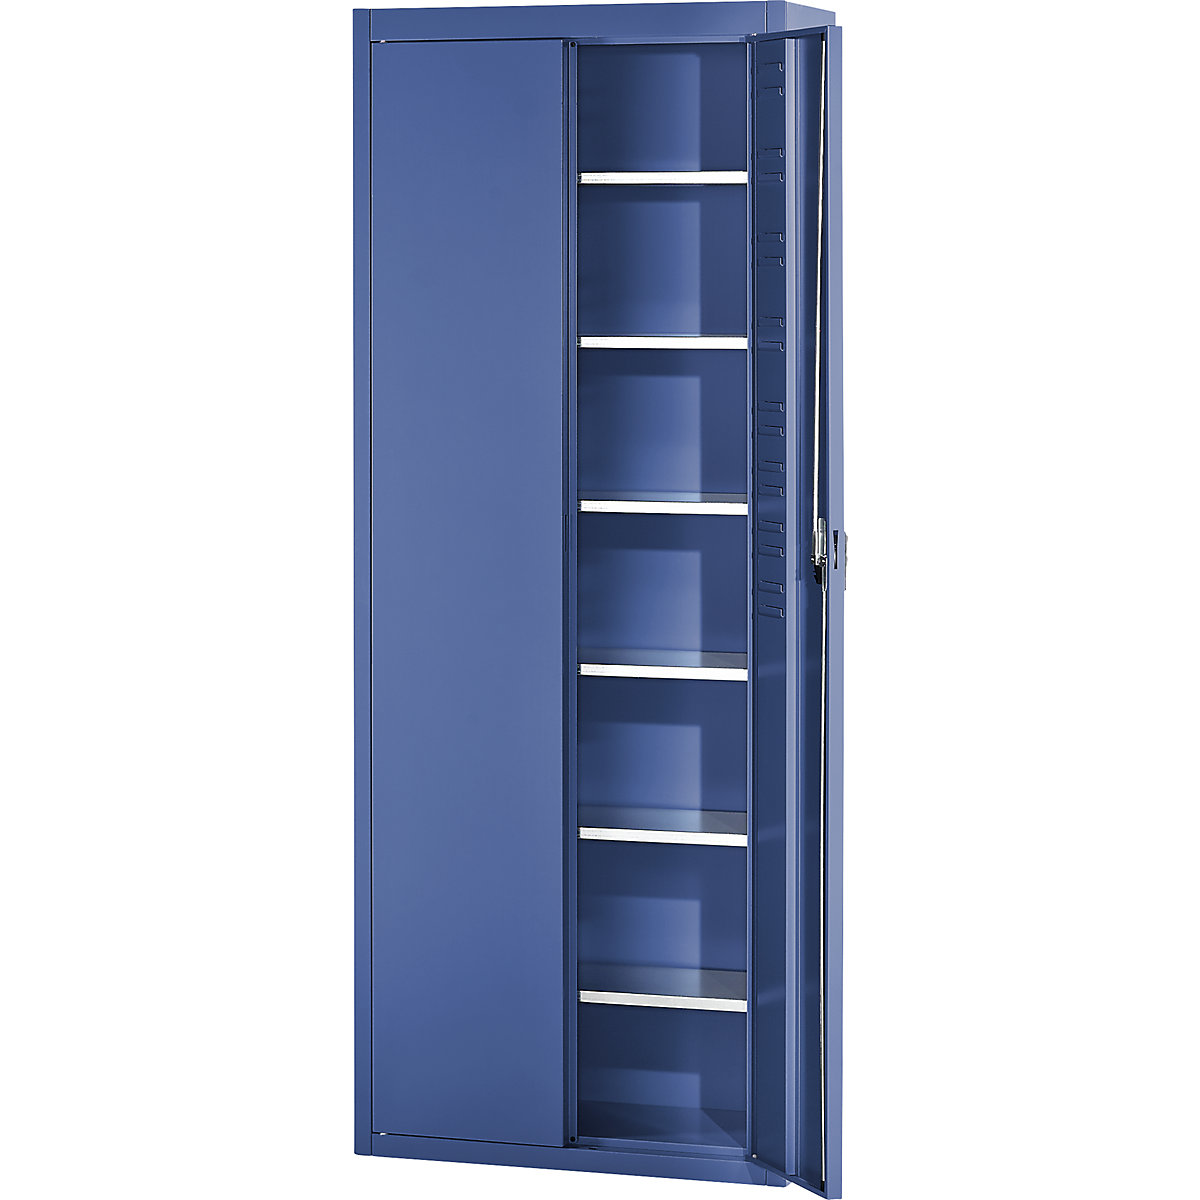 Storage cupboard, without open fronted storage bins - mauser